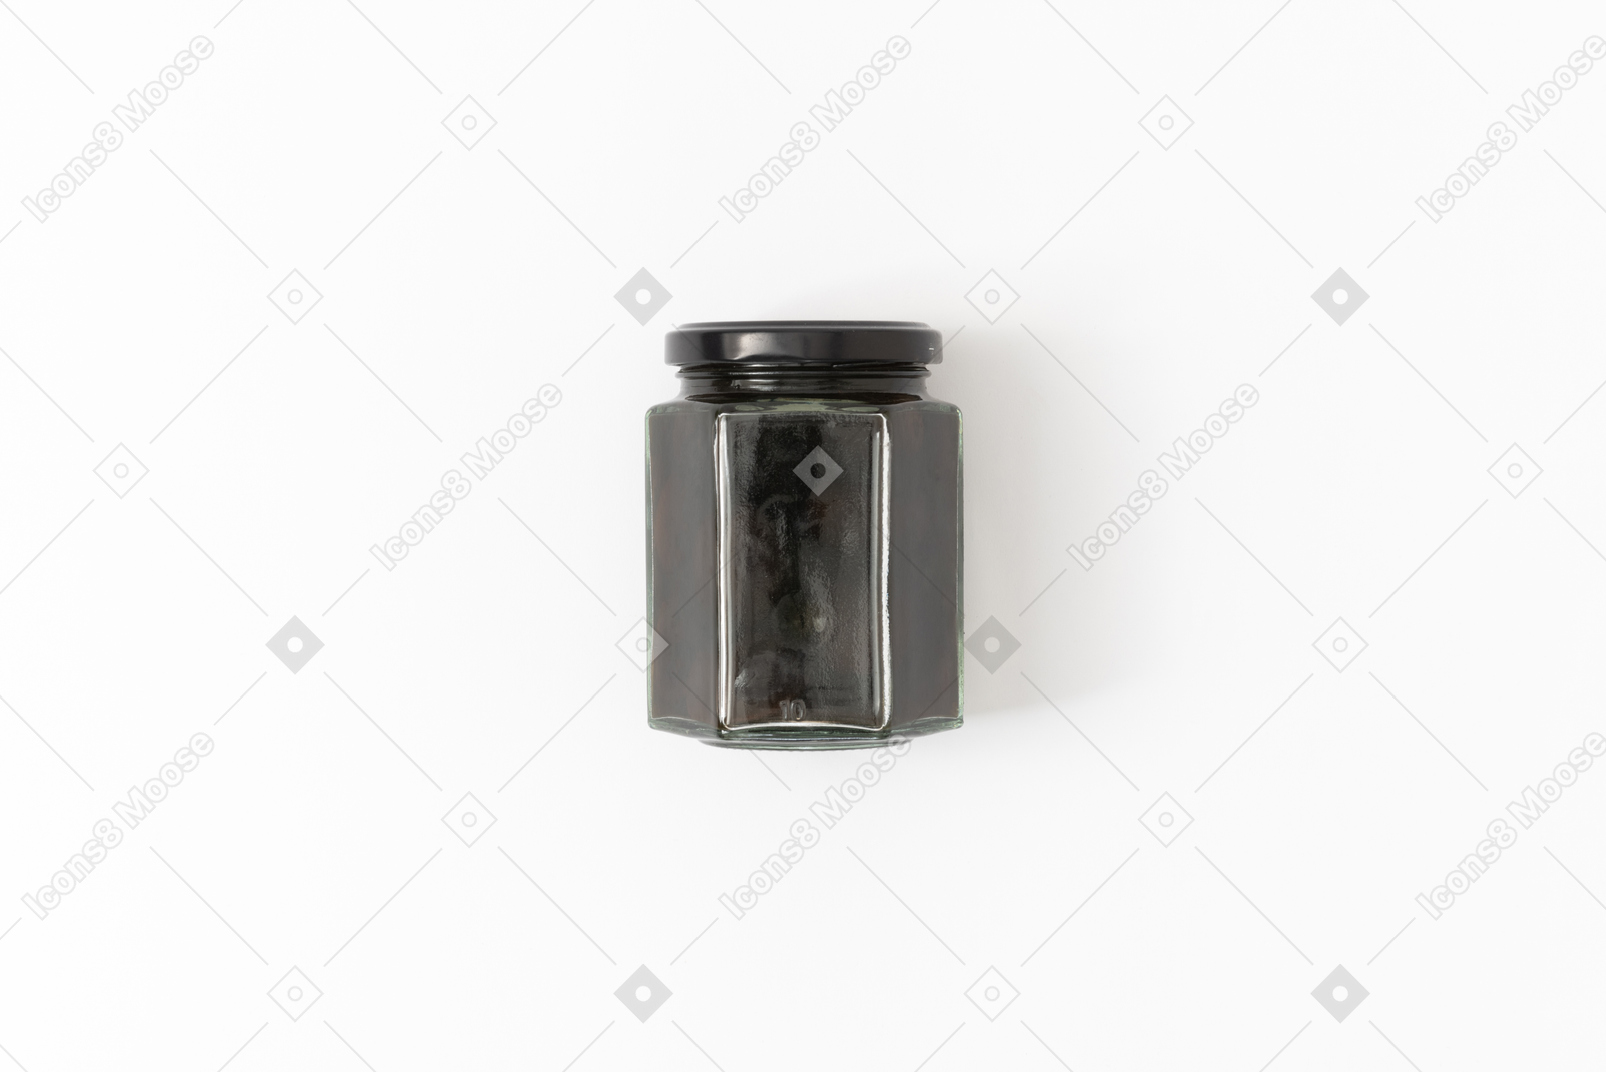 Canned black olives in a glass jar